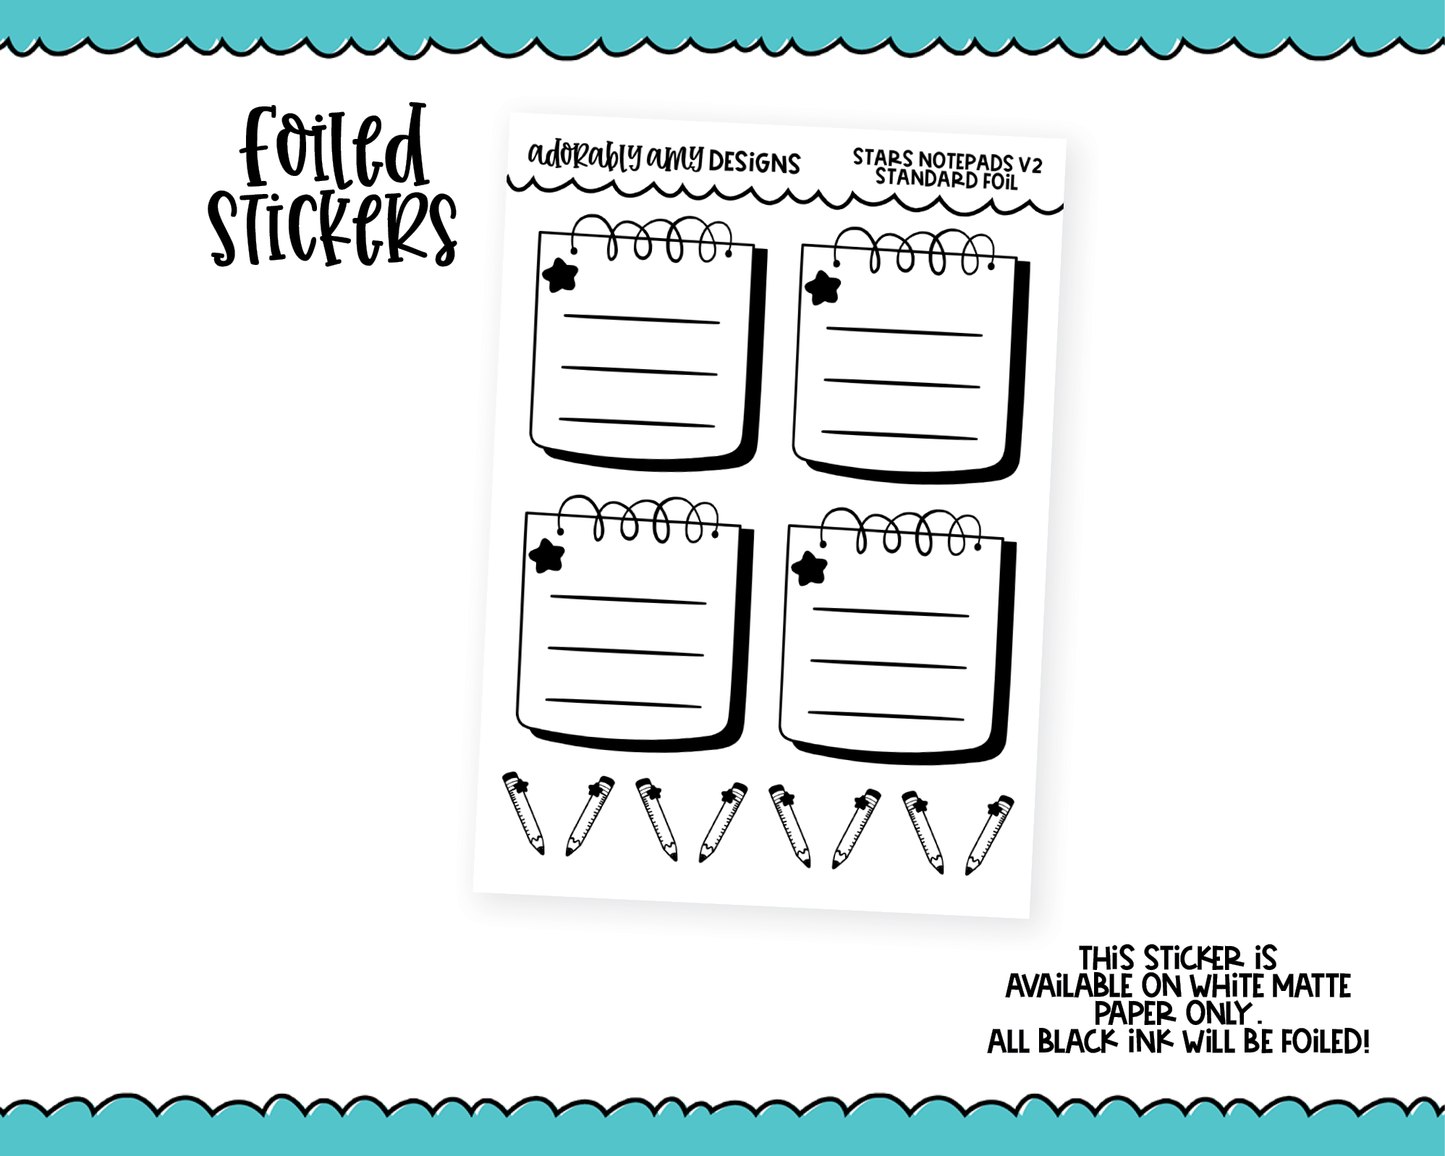 Foiled Star Notepads List Boxes V2 Planner Stickers for any Planner or Insert